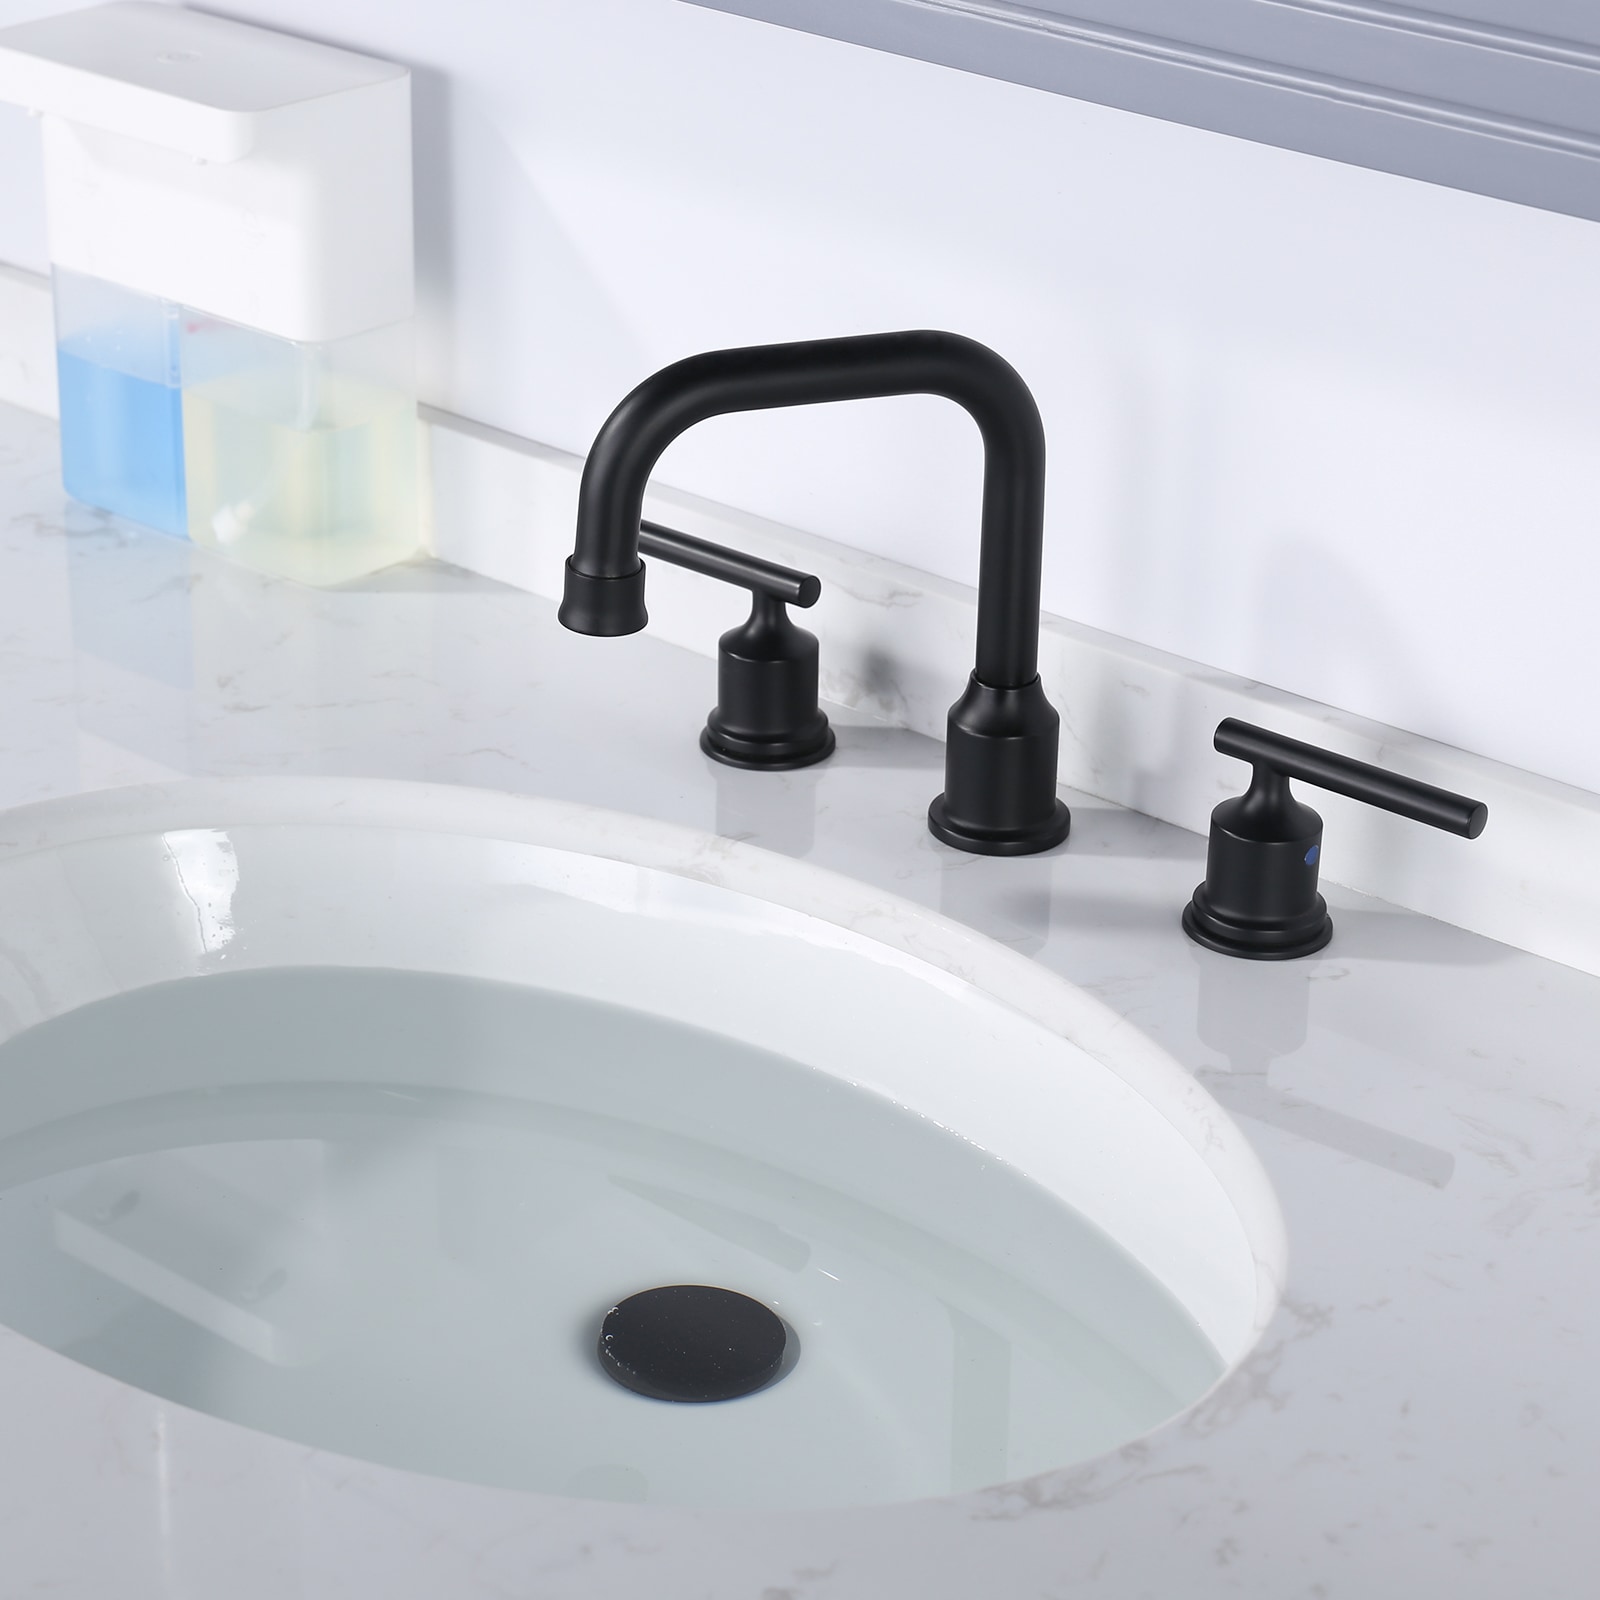 8-in widespread Bathroom Sink Faucets at Lowes.com